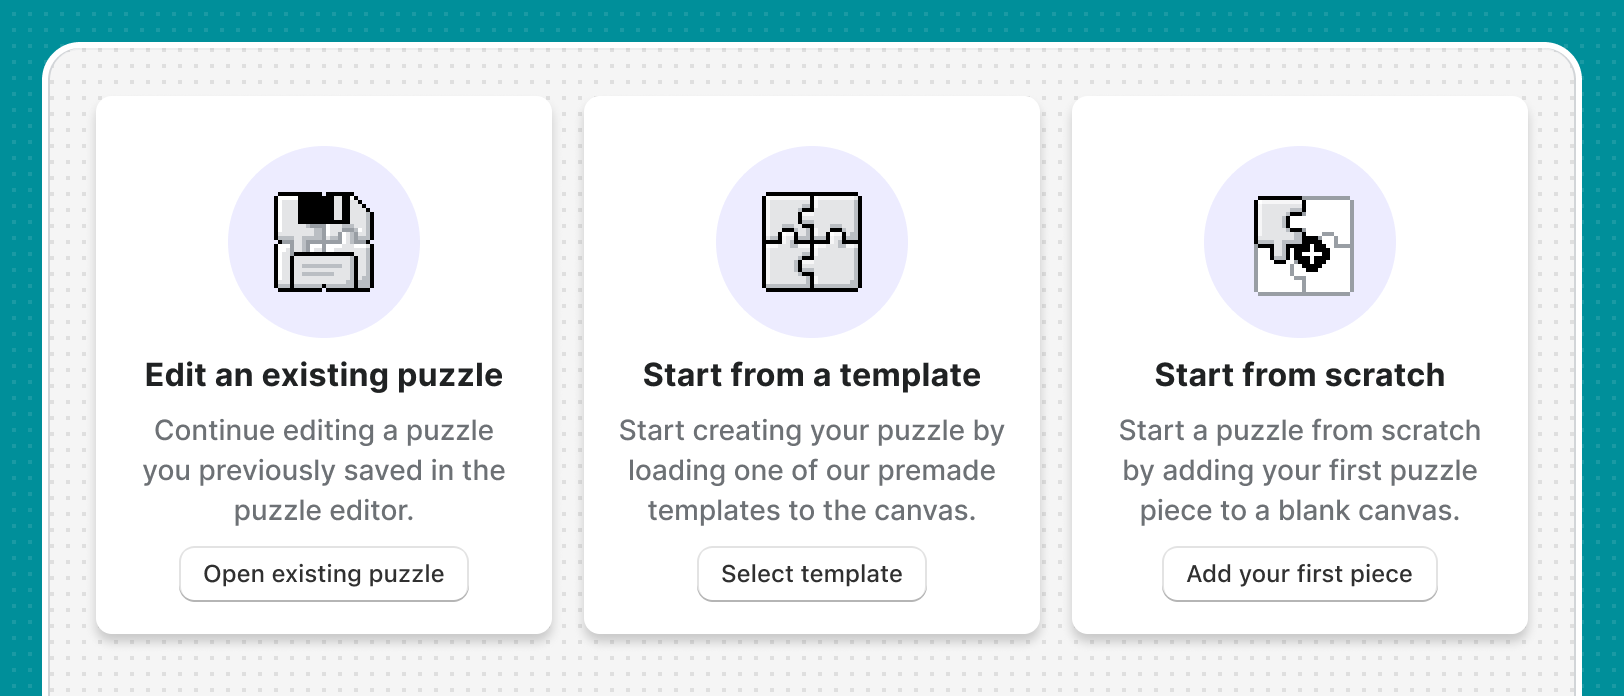 Onboarding screen showing three different options to choose in the Puzzlify puzzle editor. There are options to edit an existing puzzle, start from a template, and start from scratch.